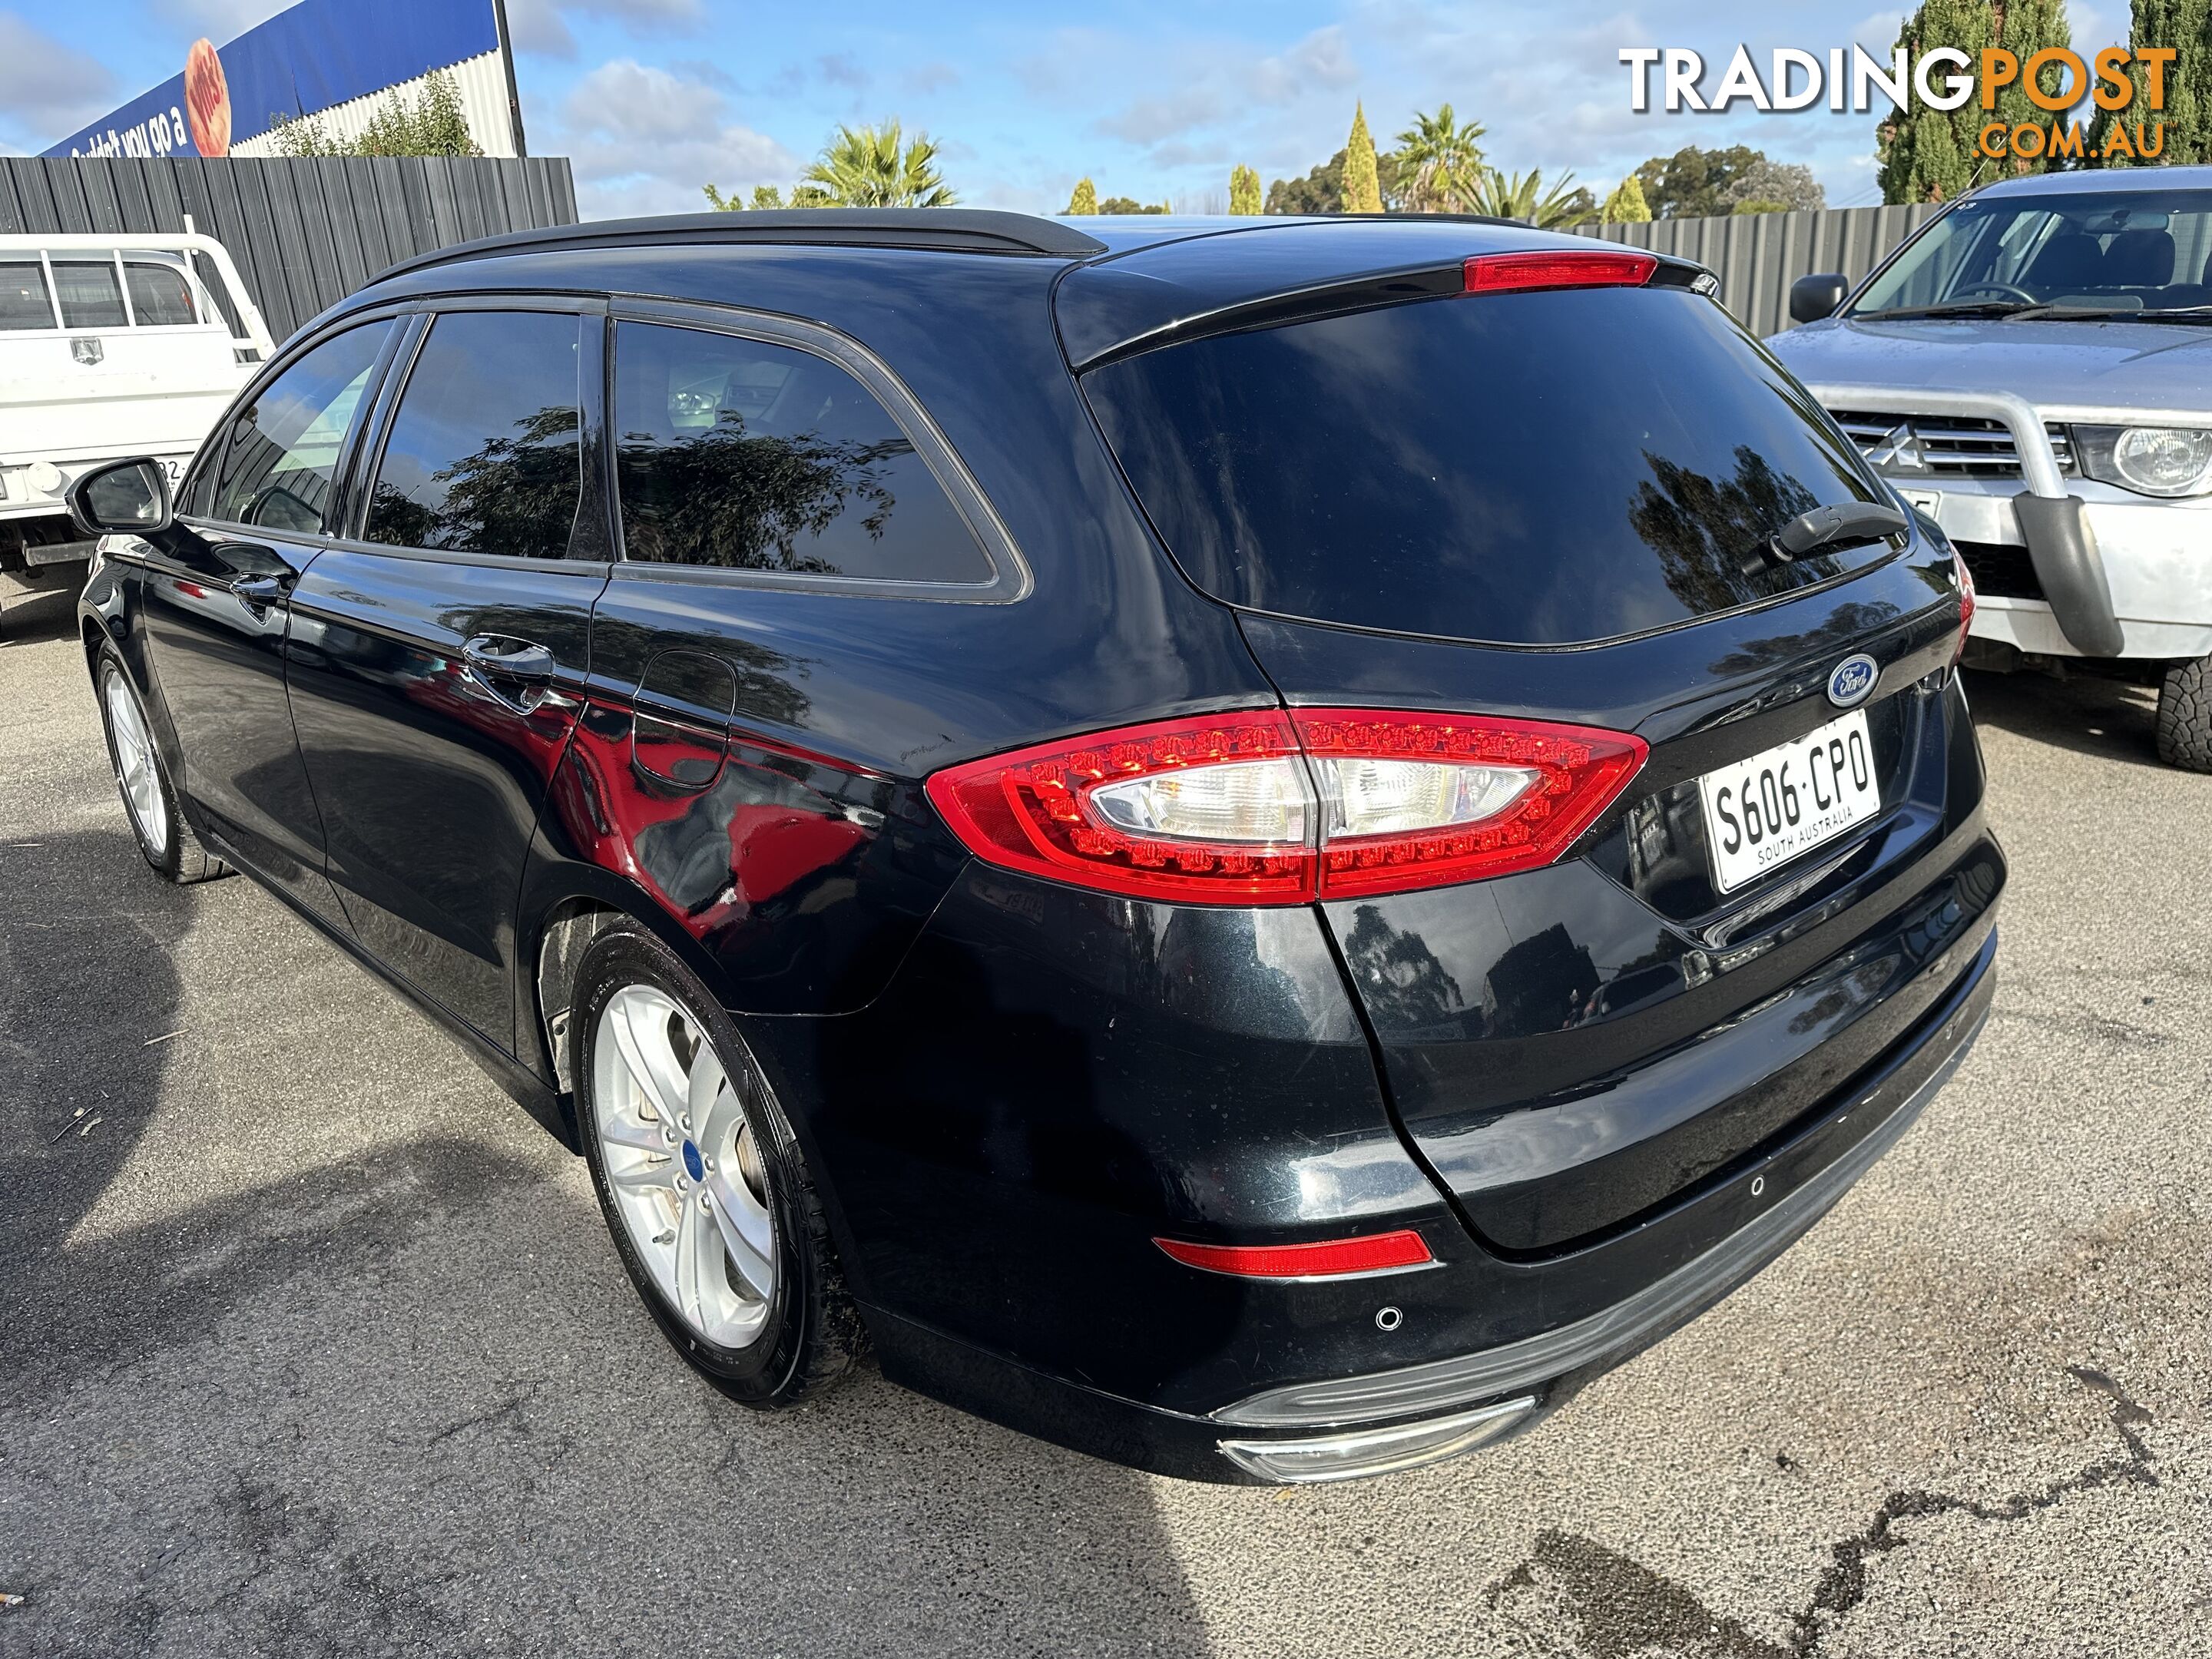 2016 Ford Mondeo MD AMBIENTE Wagon Automatic